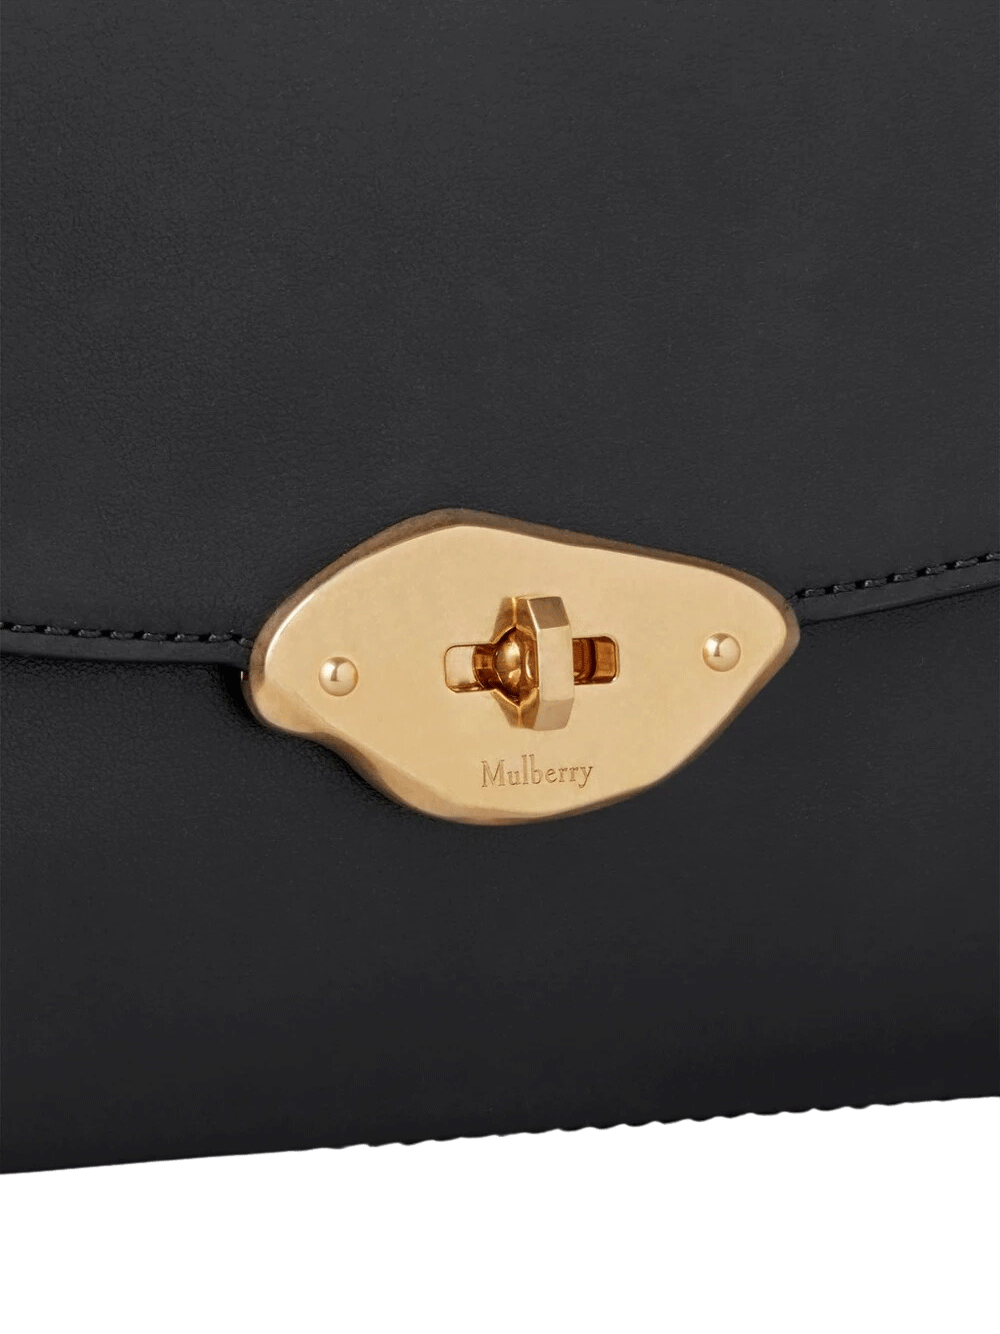 Mulberry-Lana-Clutch-High-Gloss-Leather-Black-5